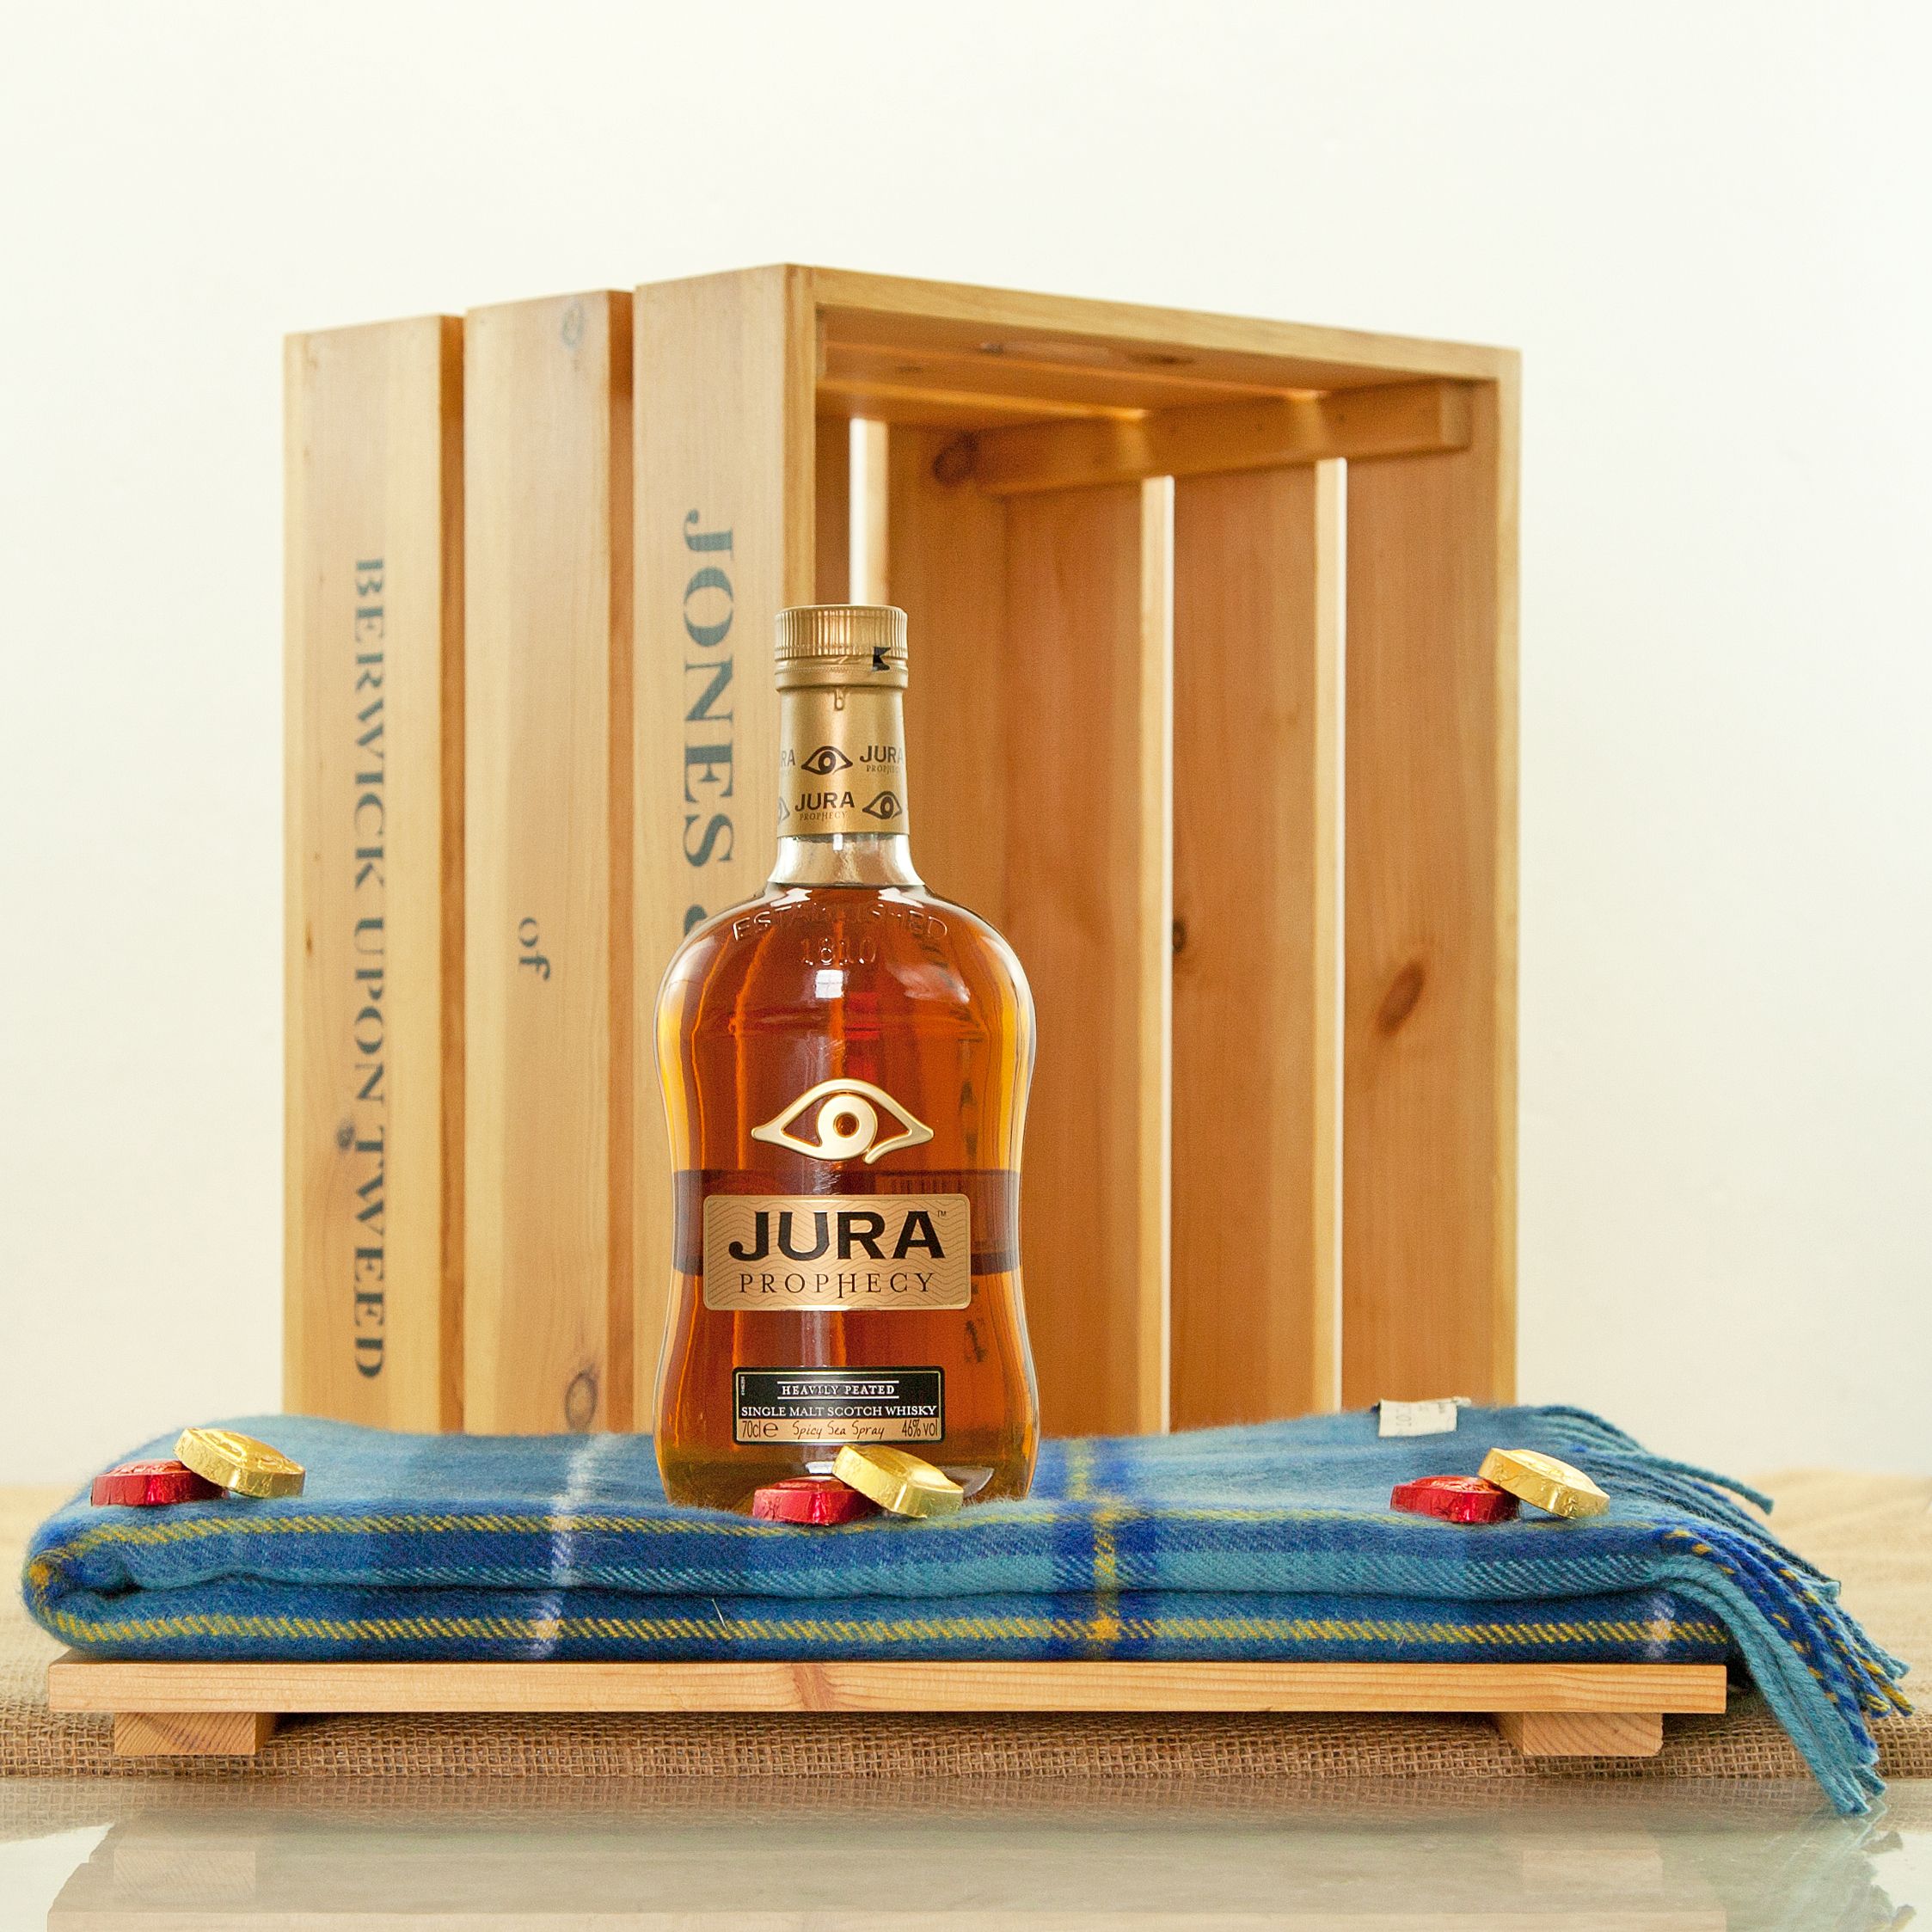 Scottish Golfers Whisky Prophecy Hamper Crate